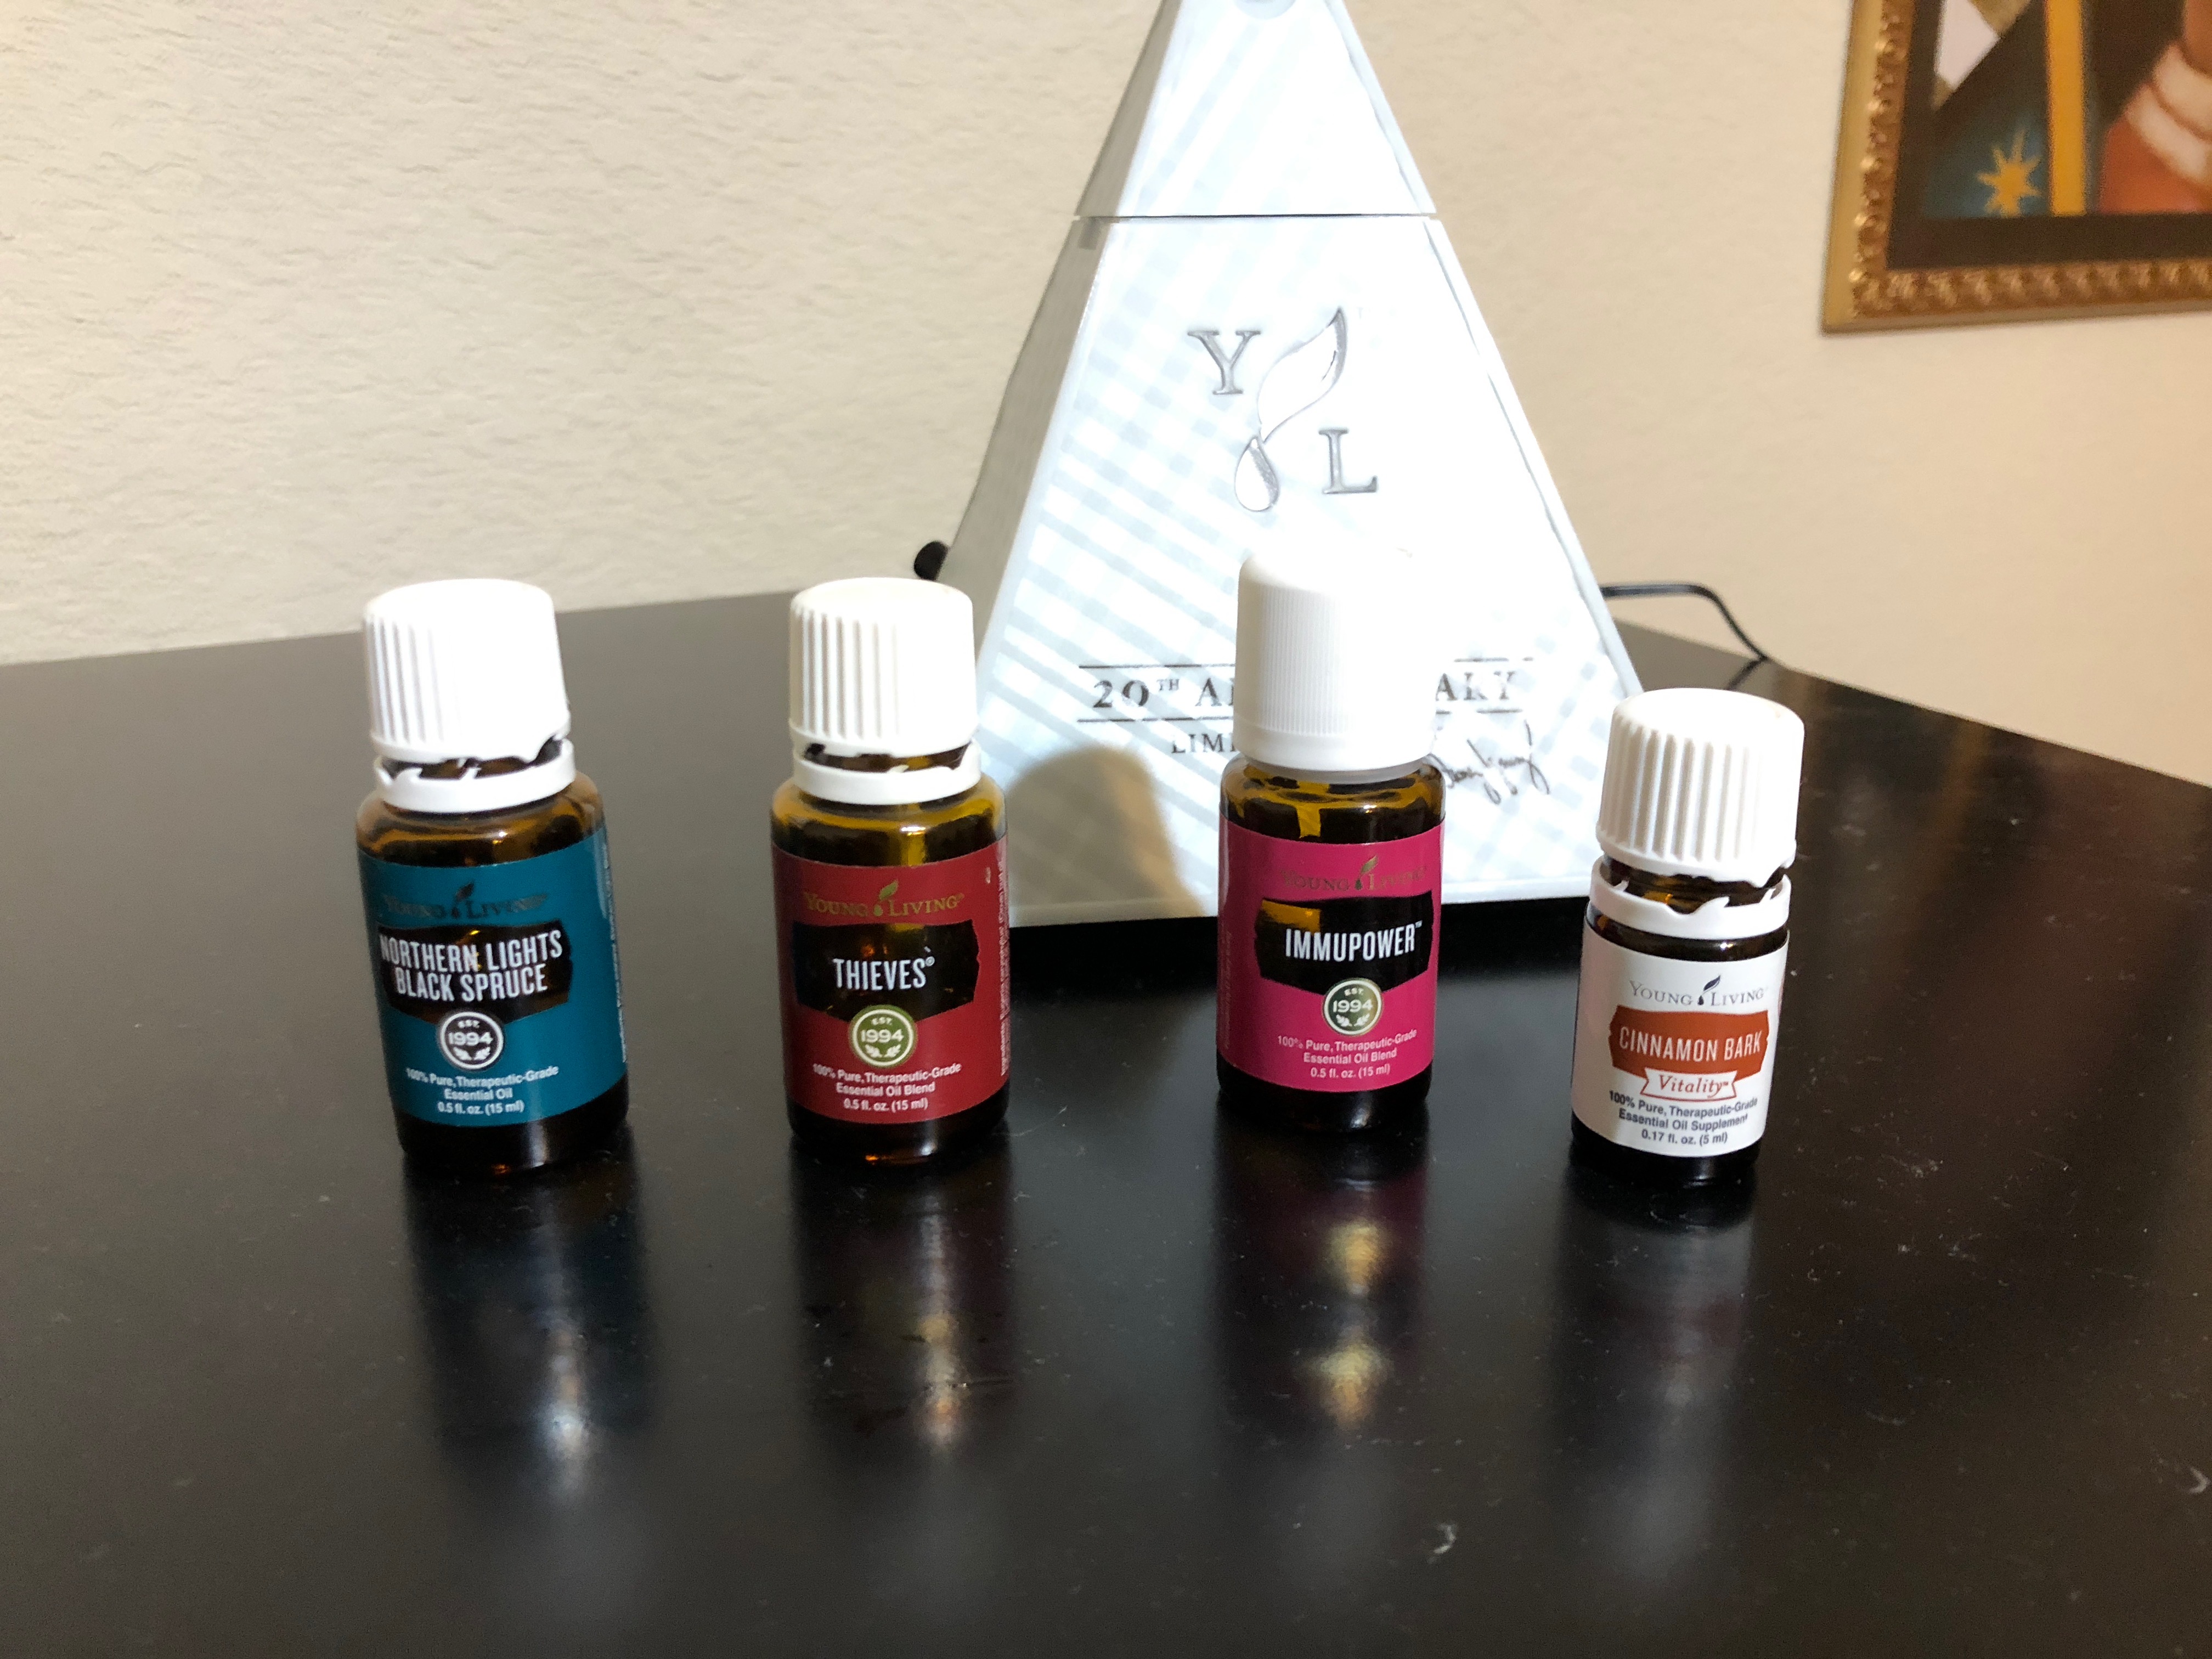 My Diffuser with Essential Oils for Men: Northern Lights Black Spruce, Thieves, Immupower and Cinnamon Bark